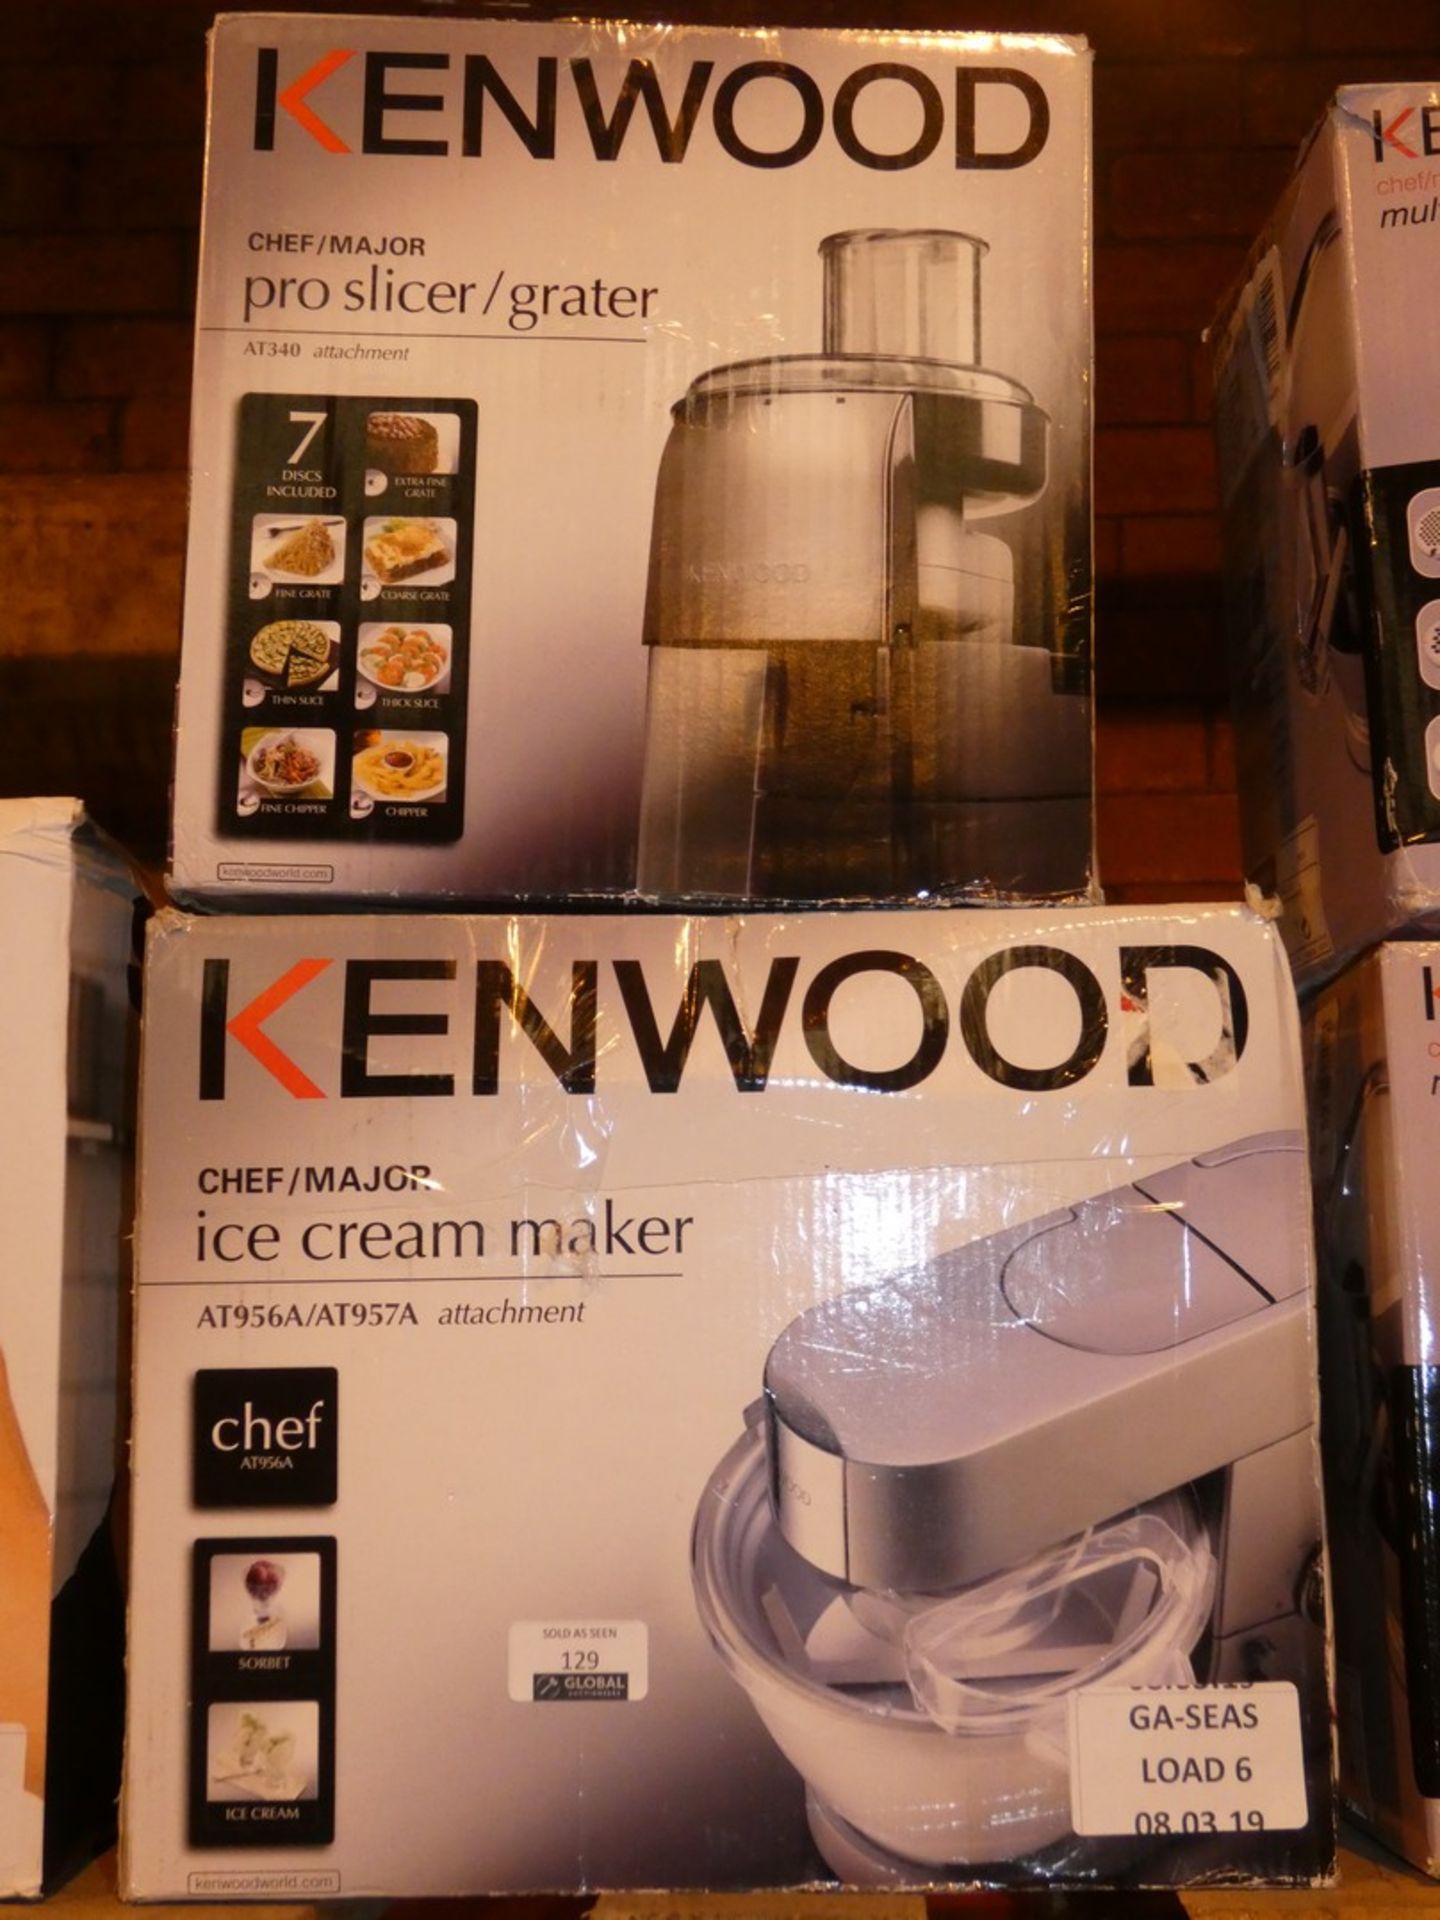 Lot to Contain 2 Assorted Items To Include a Kenwood Ice Cream Maker and a Pro Slice Attachment - Image 3 of 3